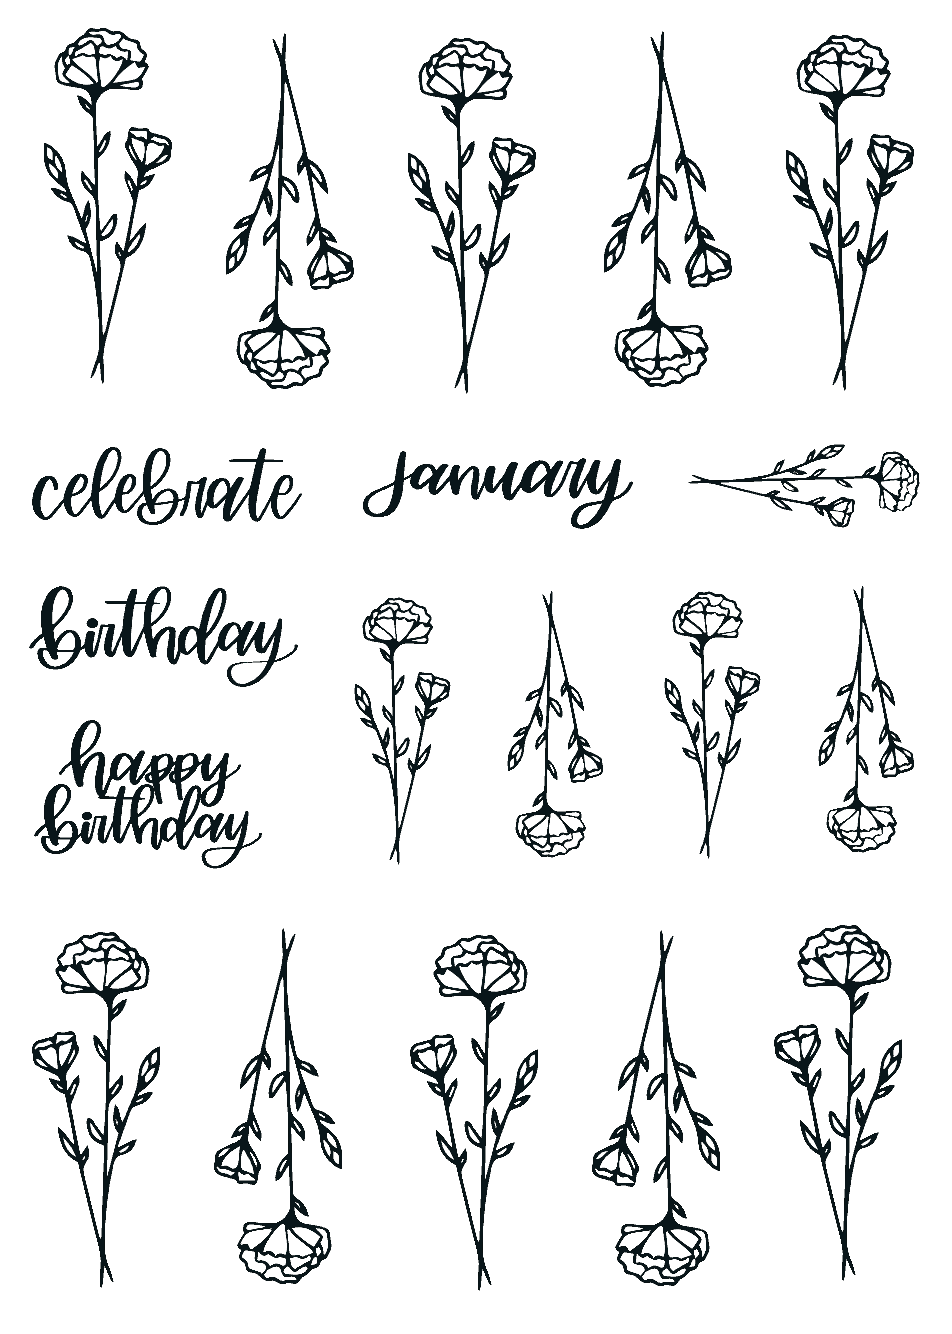 January Lined Birth Monthly Florals Sticker Sheet